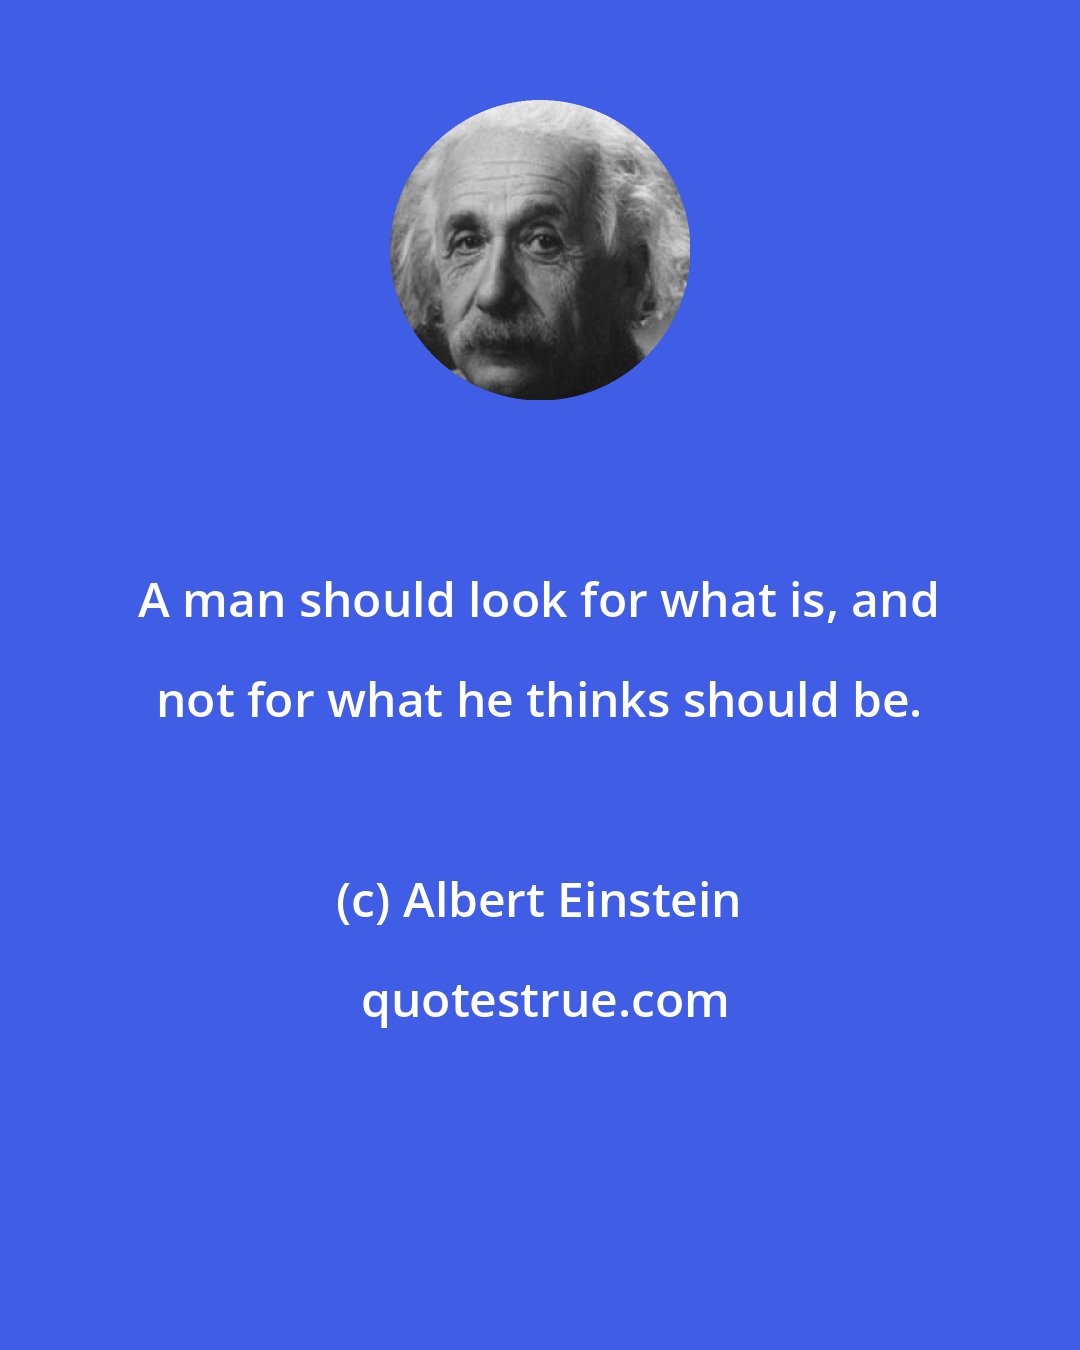 Albert Einstein: A man should look for what is, and not for what he thinks should be.